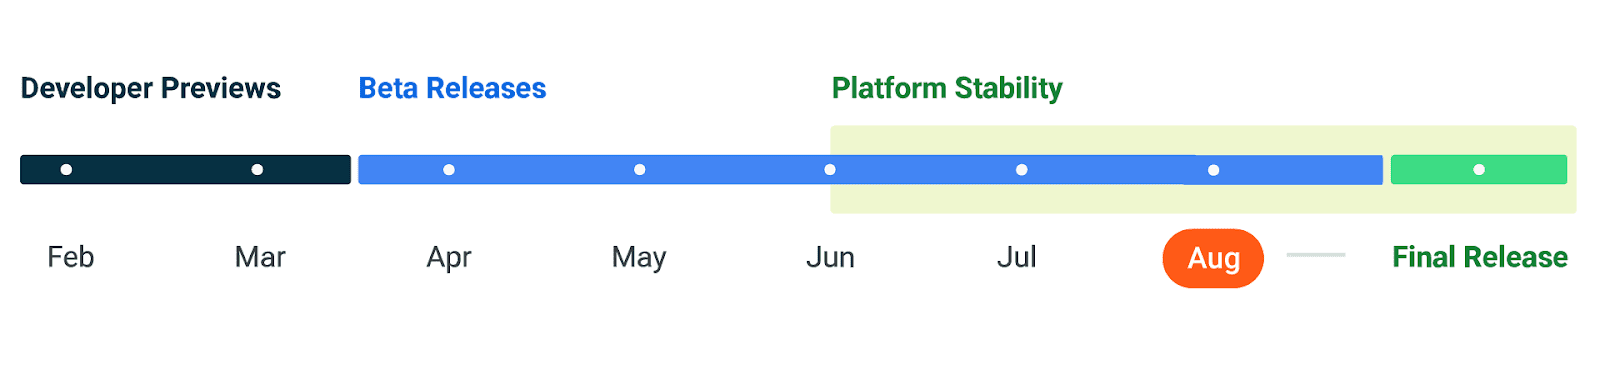 Image of timeline showing Android 14 release is on schedule with Platform Stability testing happening in August